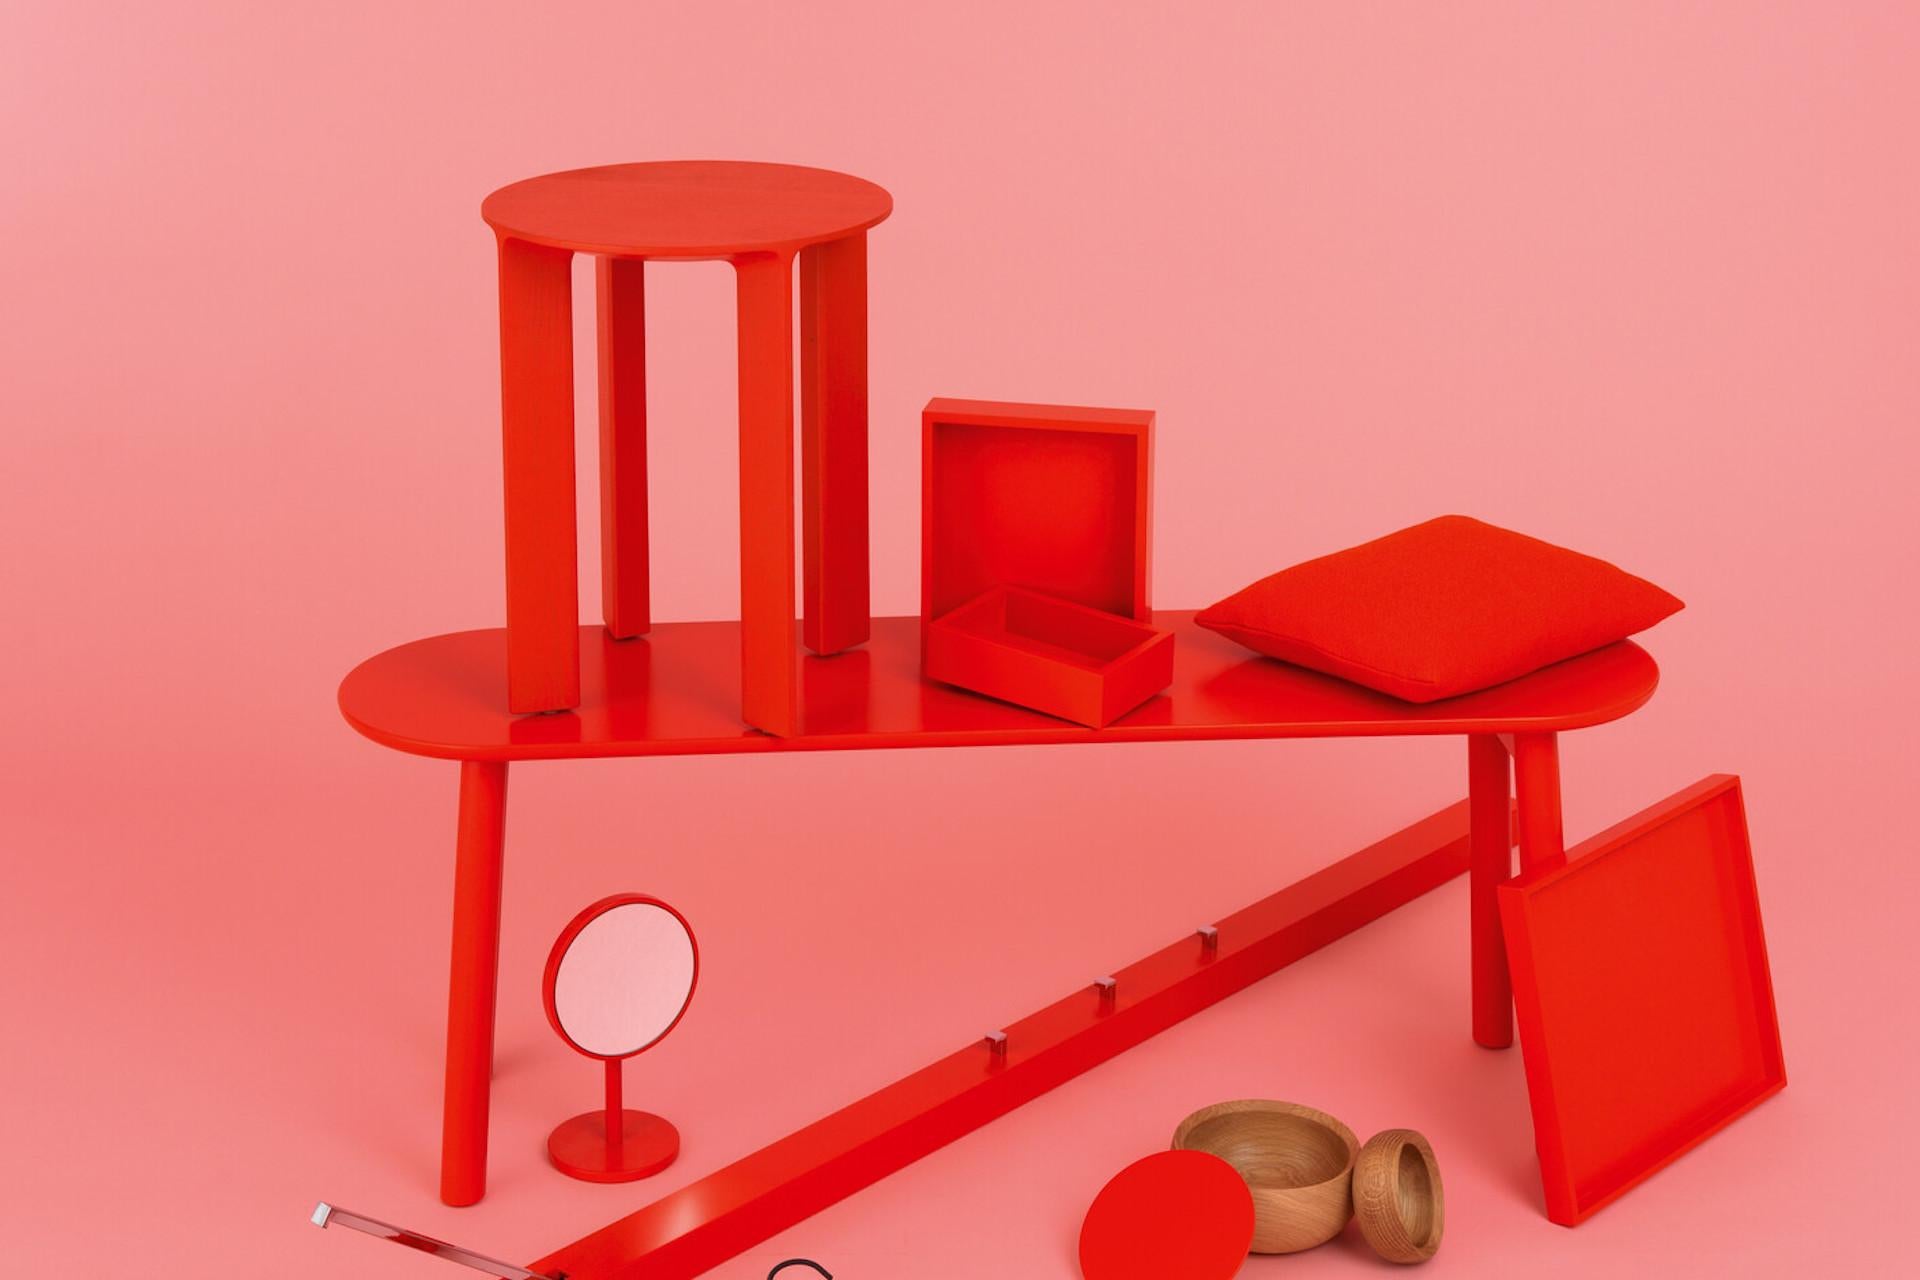 NEW Schonbuch Coral Box M Tally
TALLY is a versatile tray and comes in a choice of interesting lacquer colours and three different sizes. Alone or in a group, side by side or one inside the other, TALLY offers inspiration for creative arrangements